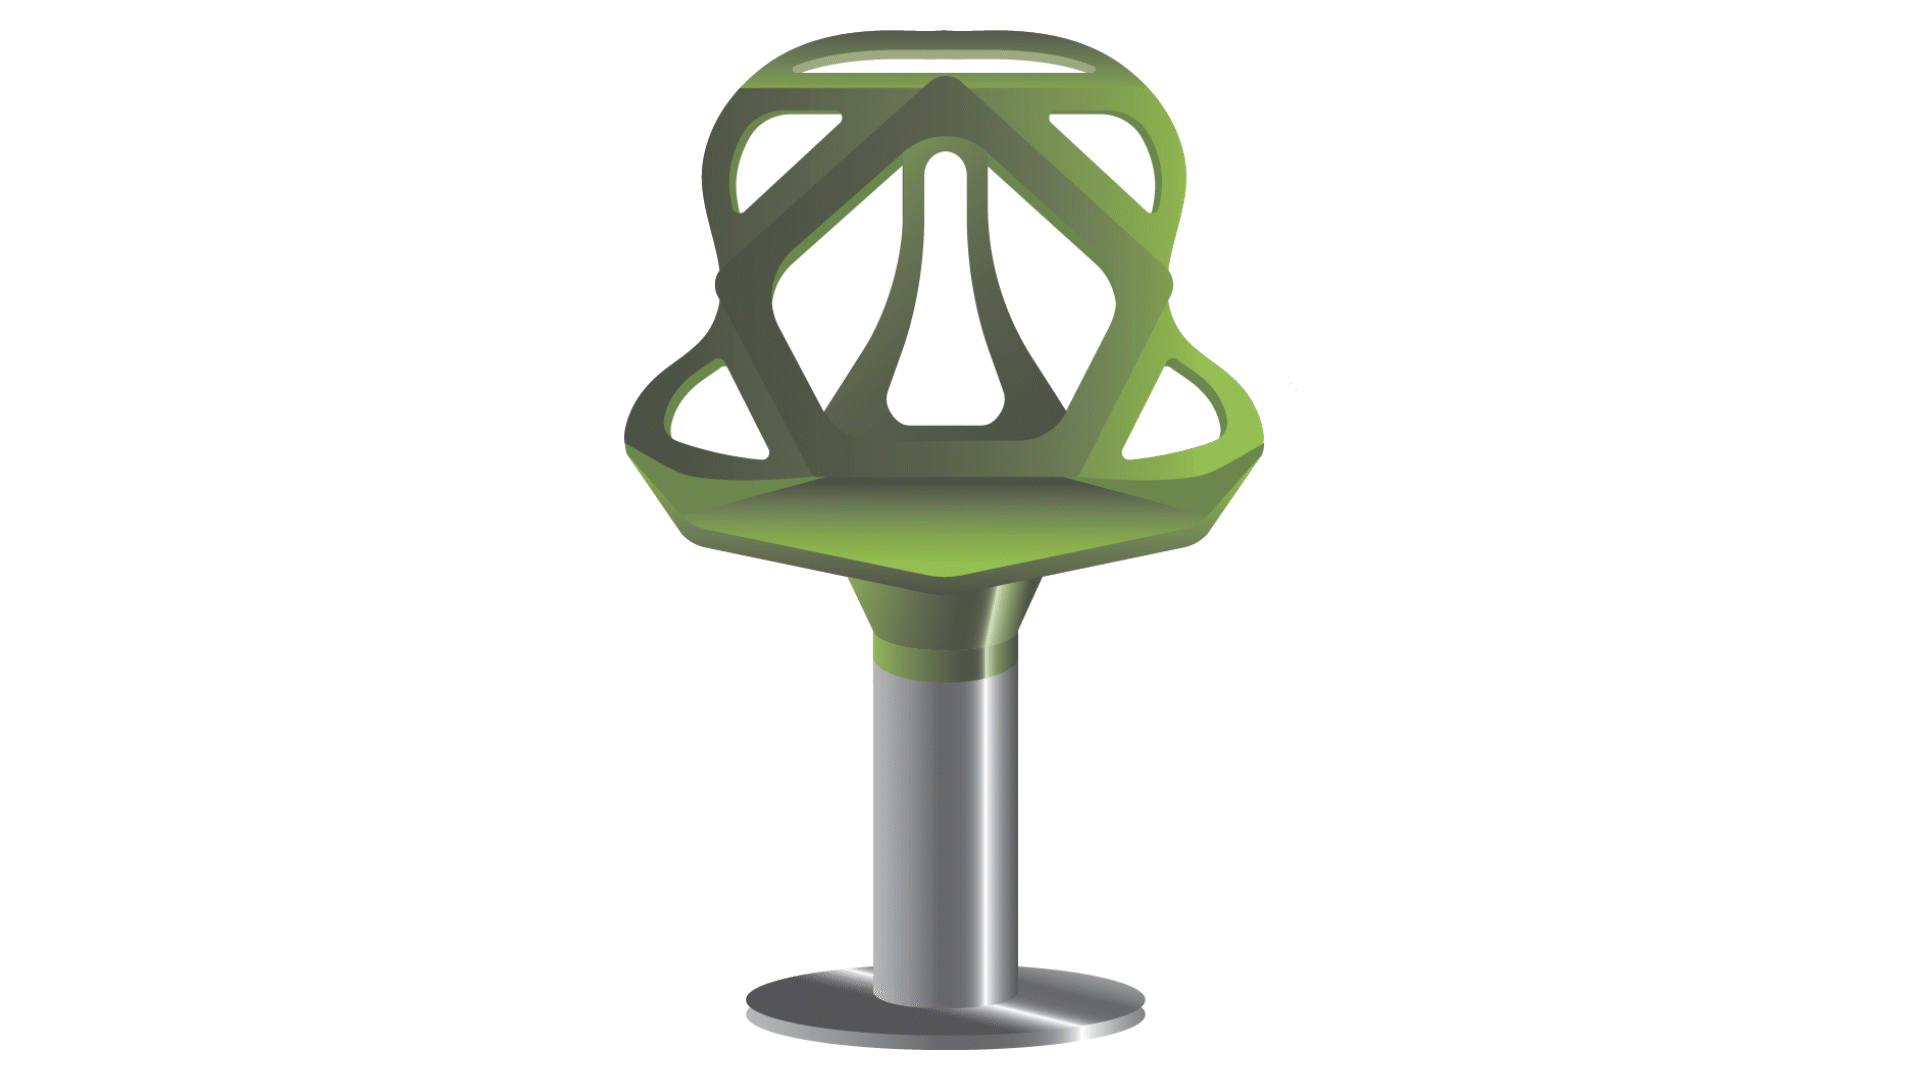 A funky green chair seat is shown with two different bases. In one, the base is a straight metal column leading to a flat platform at the base. In the other, the base is conical, going from being thinner at the top to thicker at the bottom.